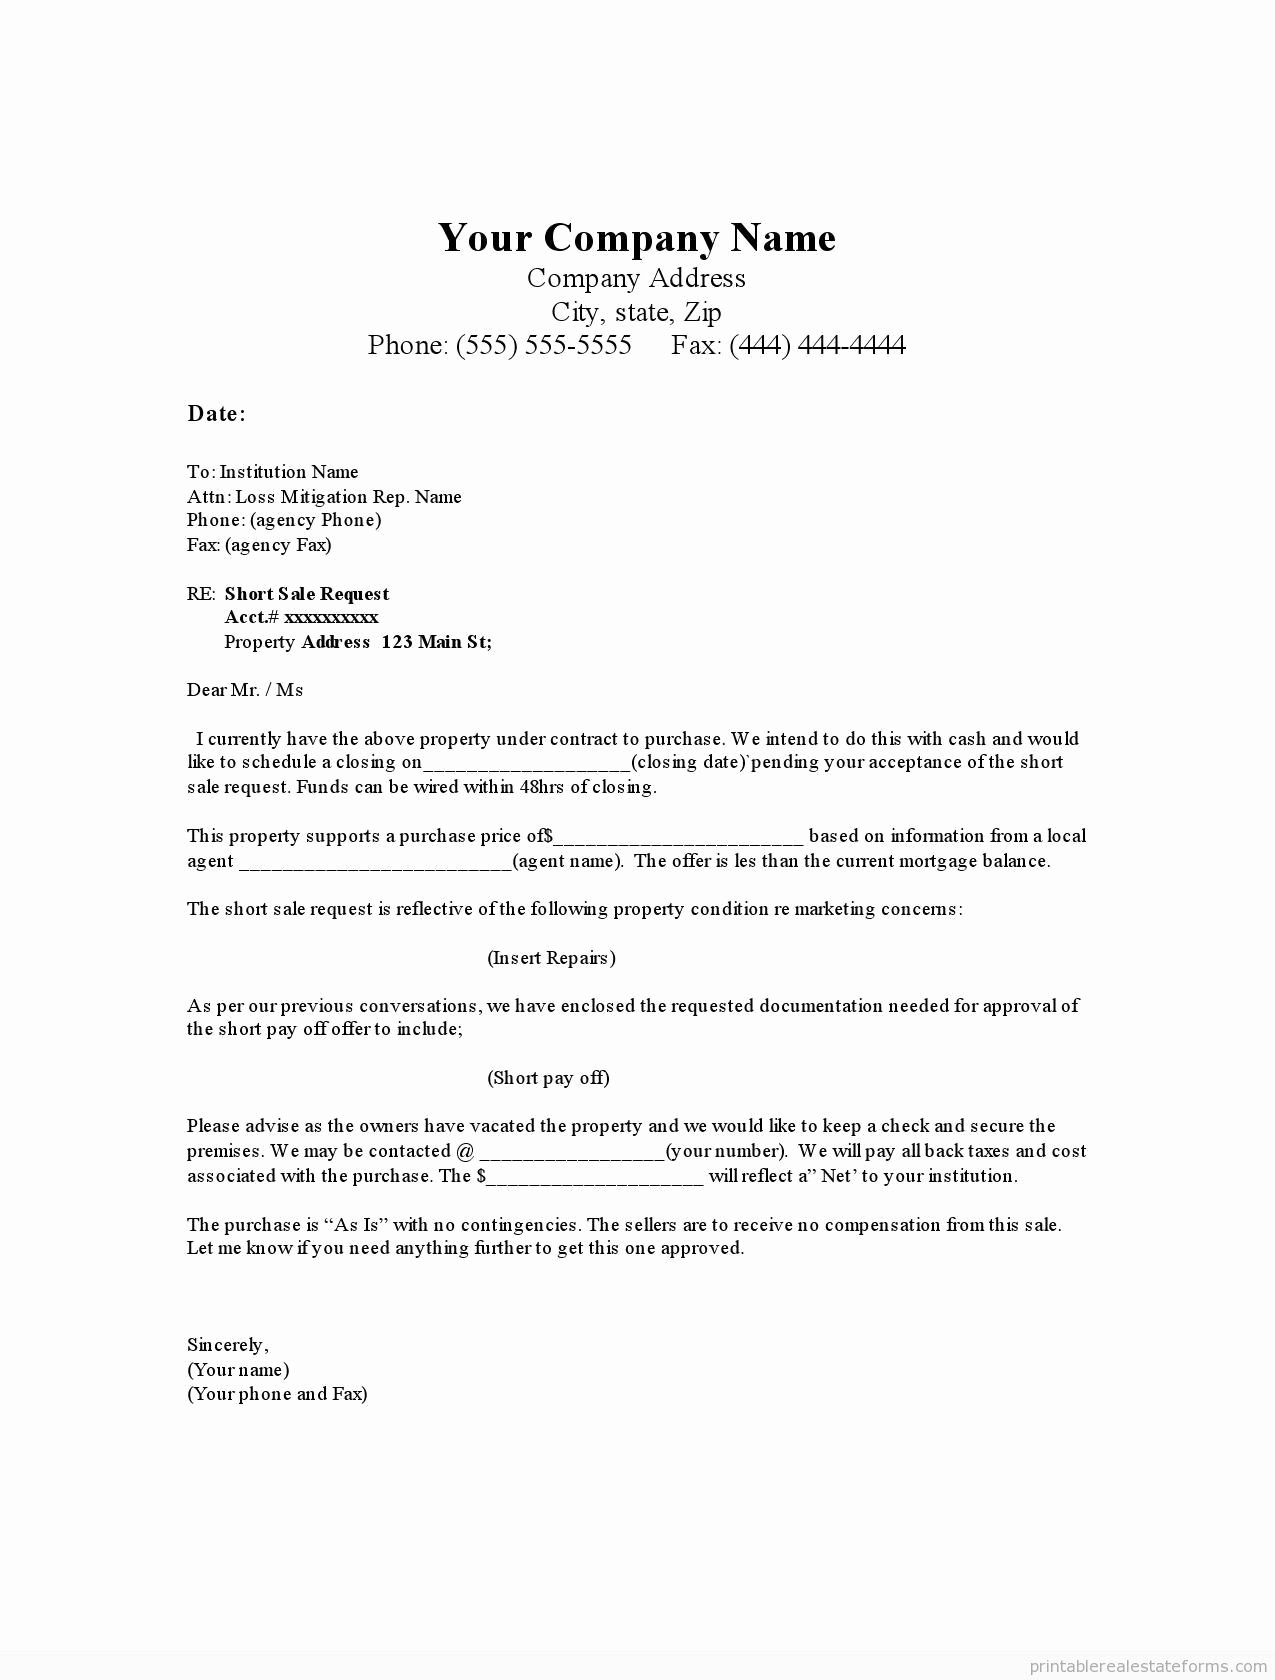 Home Offer Letter Template Beautiful Printable Short Offer Letter Good Condition Template 2015